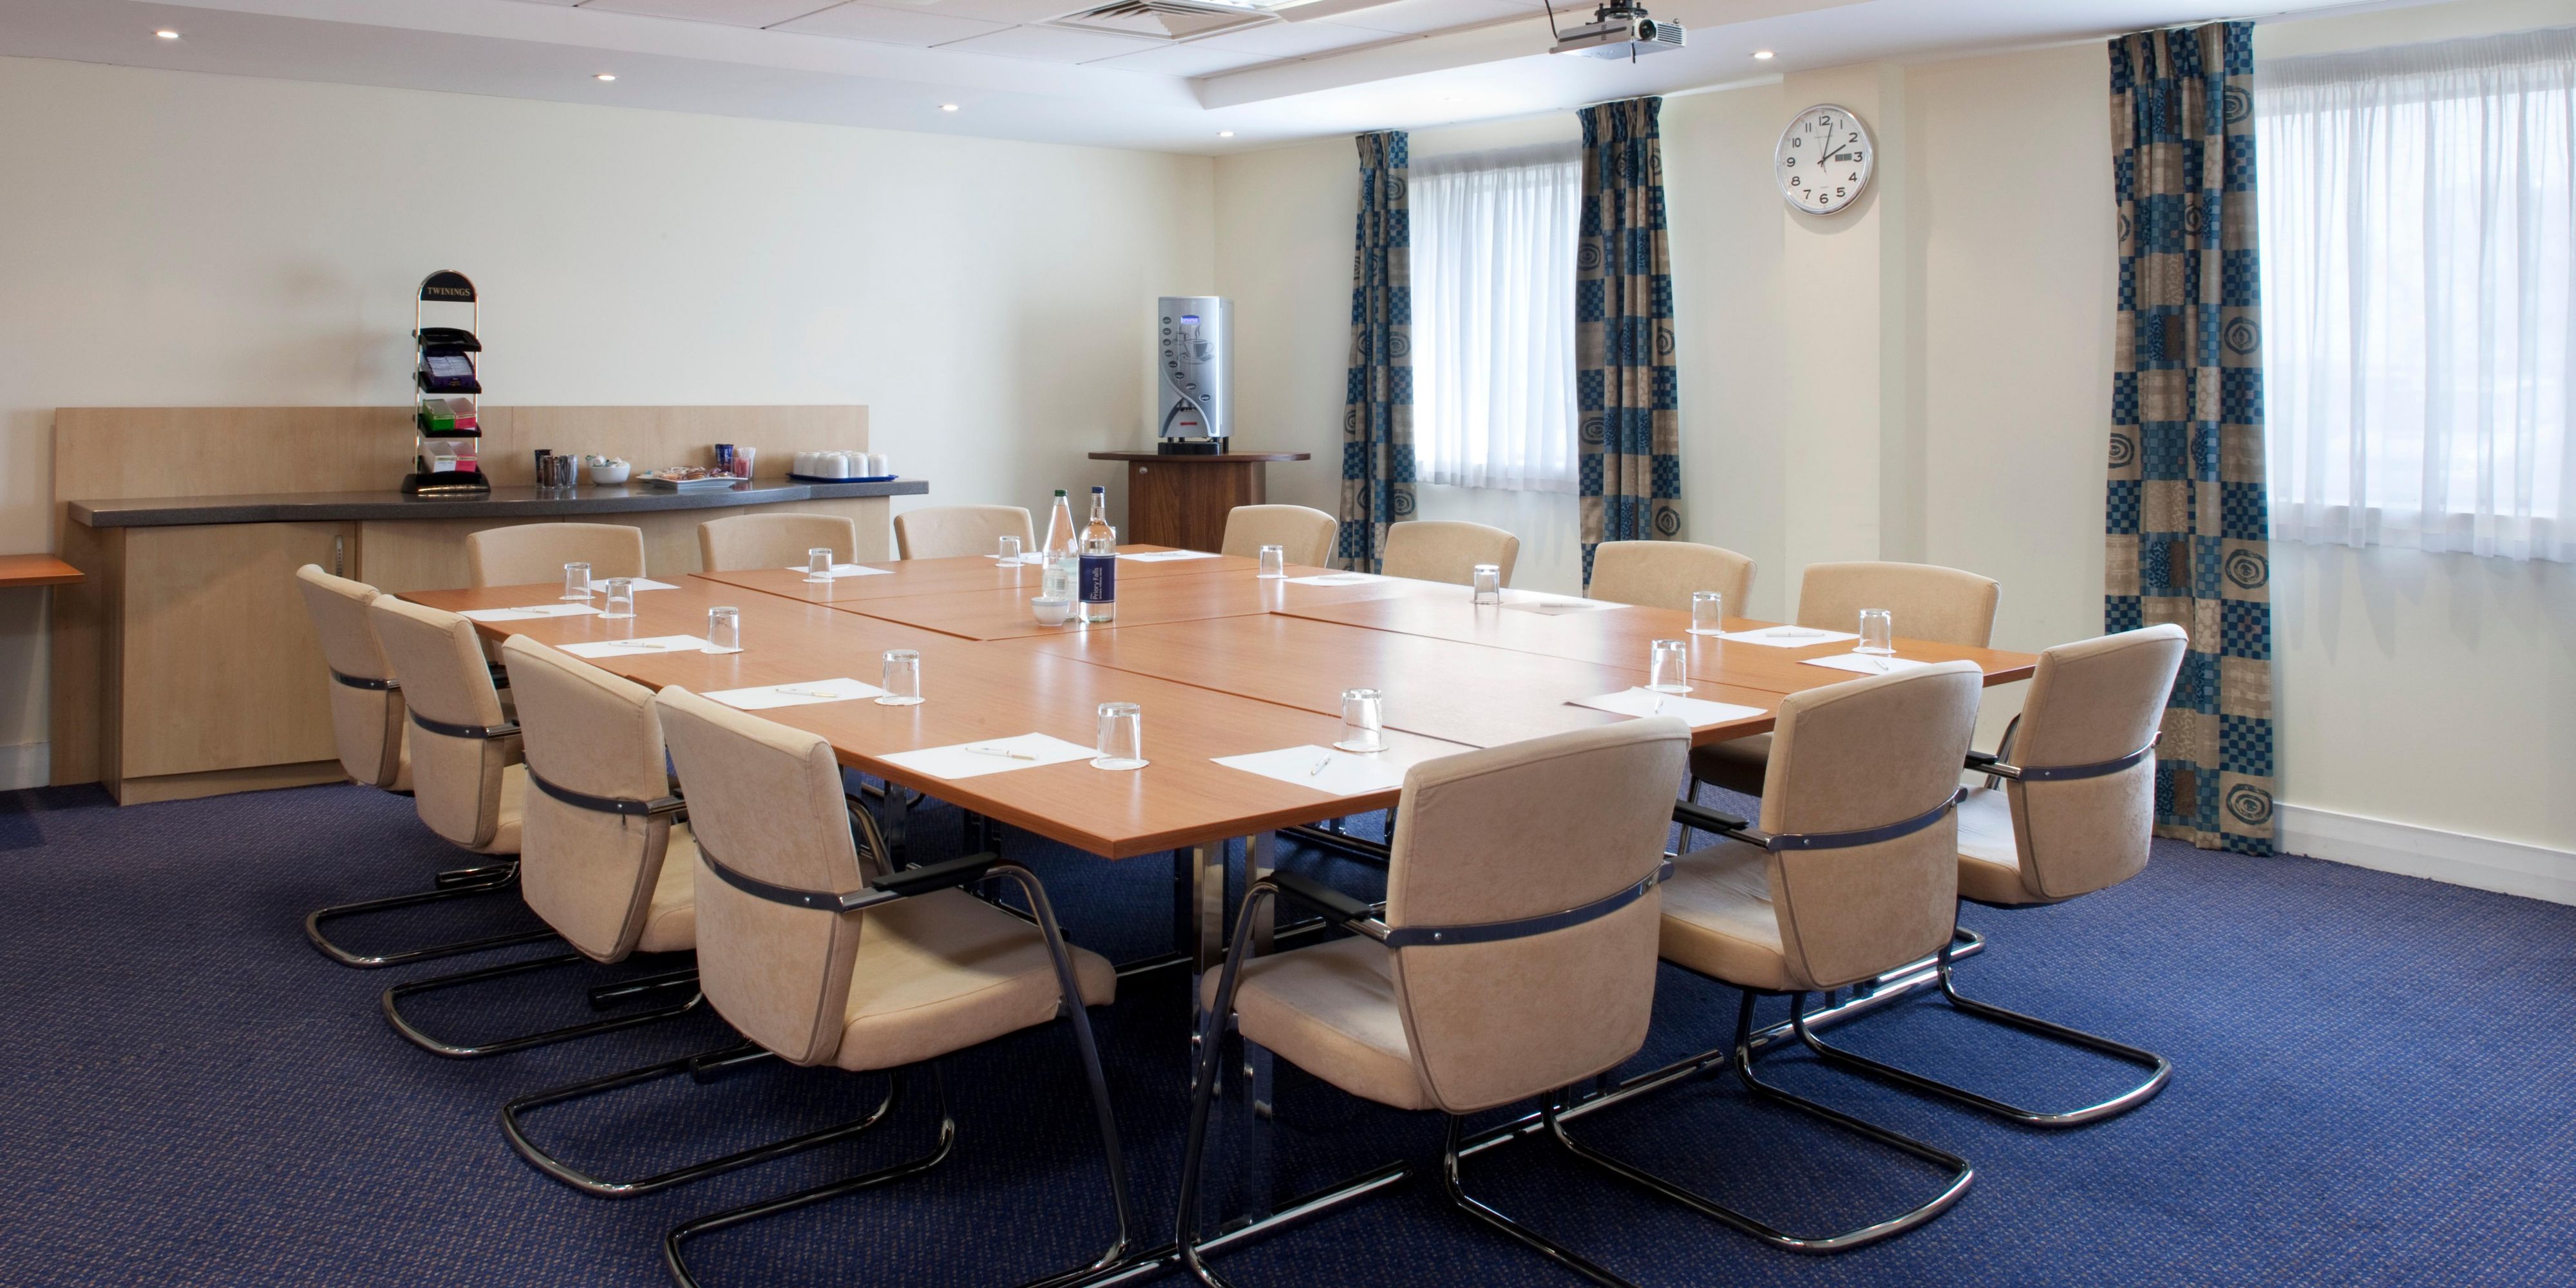 Ideal for meetings or events our spacious event room is available at competitive room hire rates. Free wi-fi and parking available to all attendees.